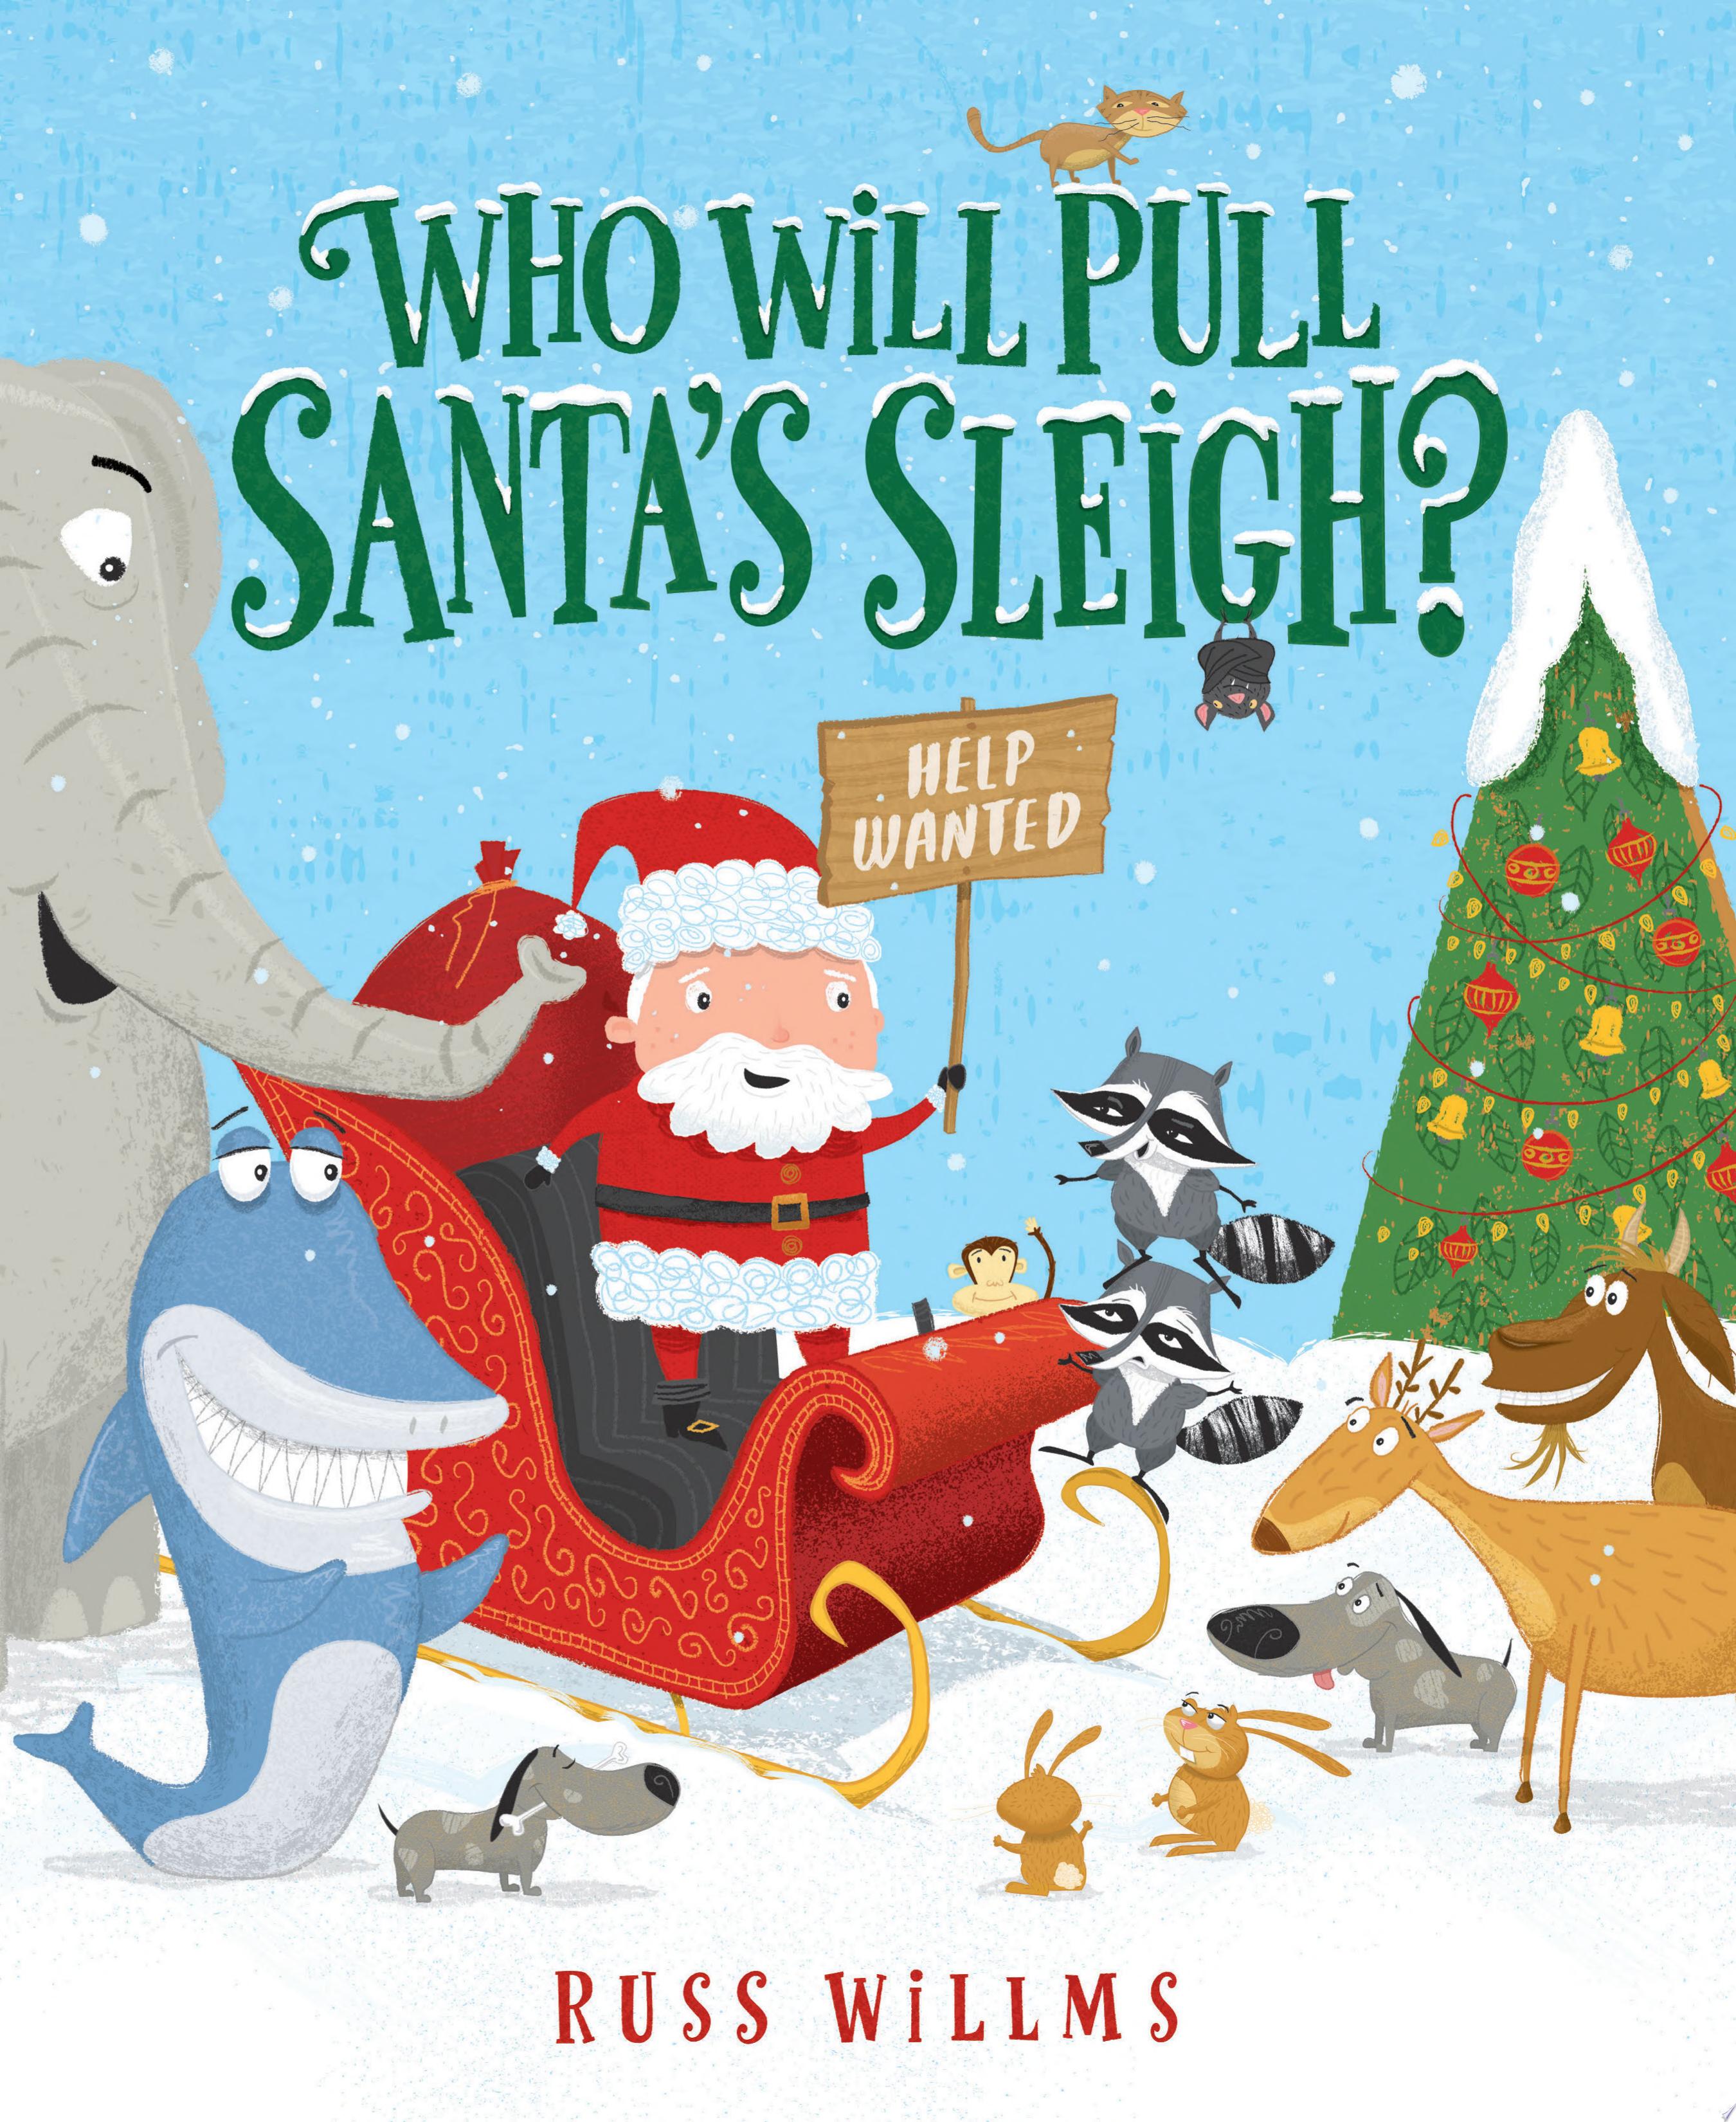 Image for "Who Will Pull Santa's Sleigh?"